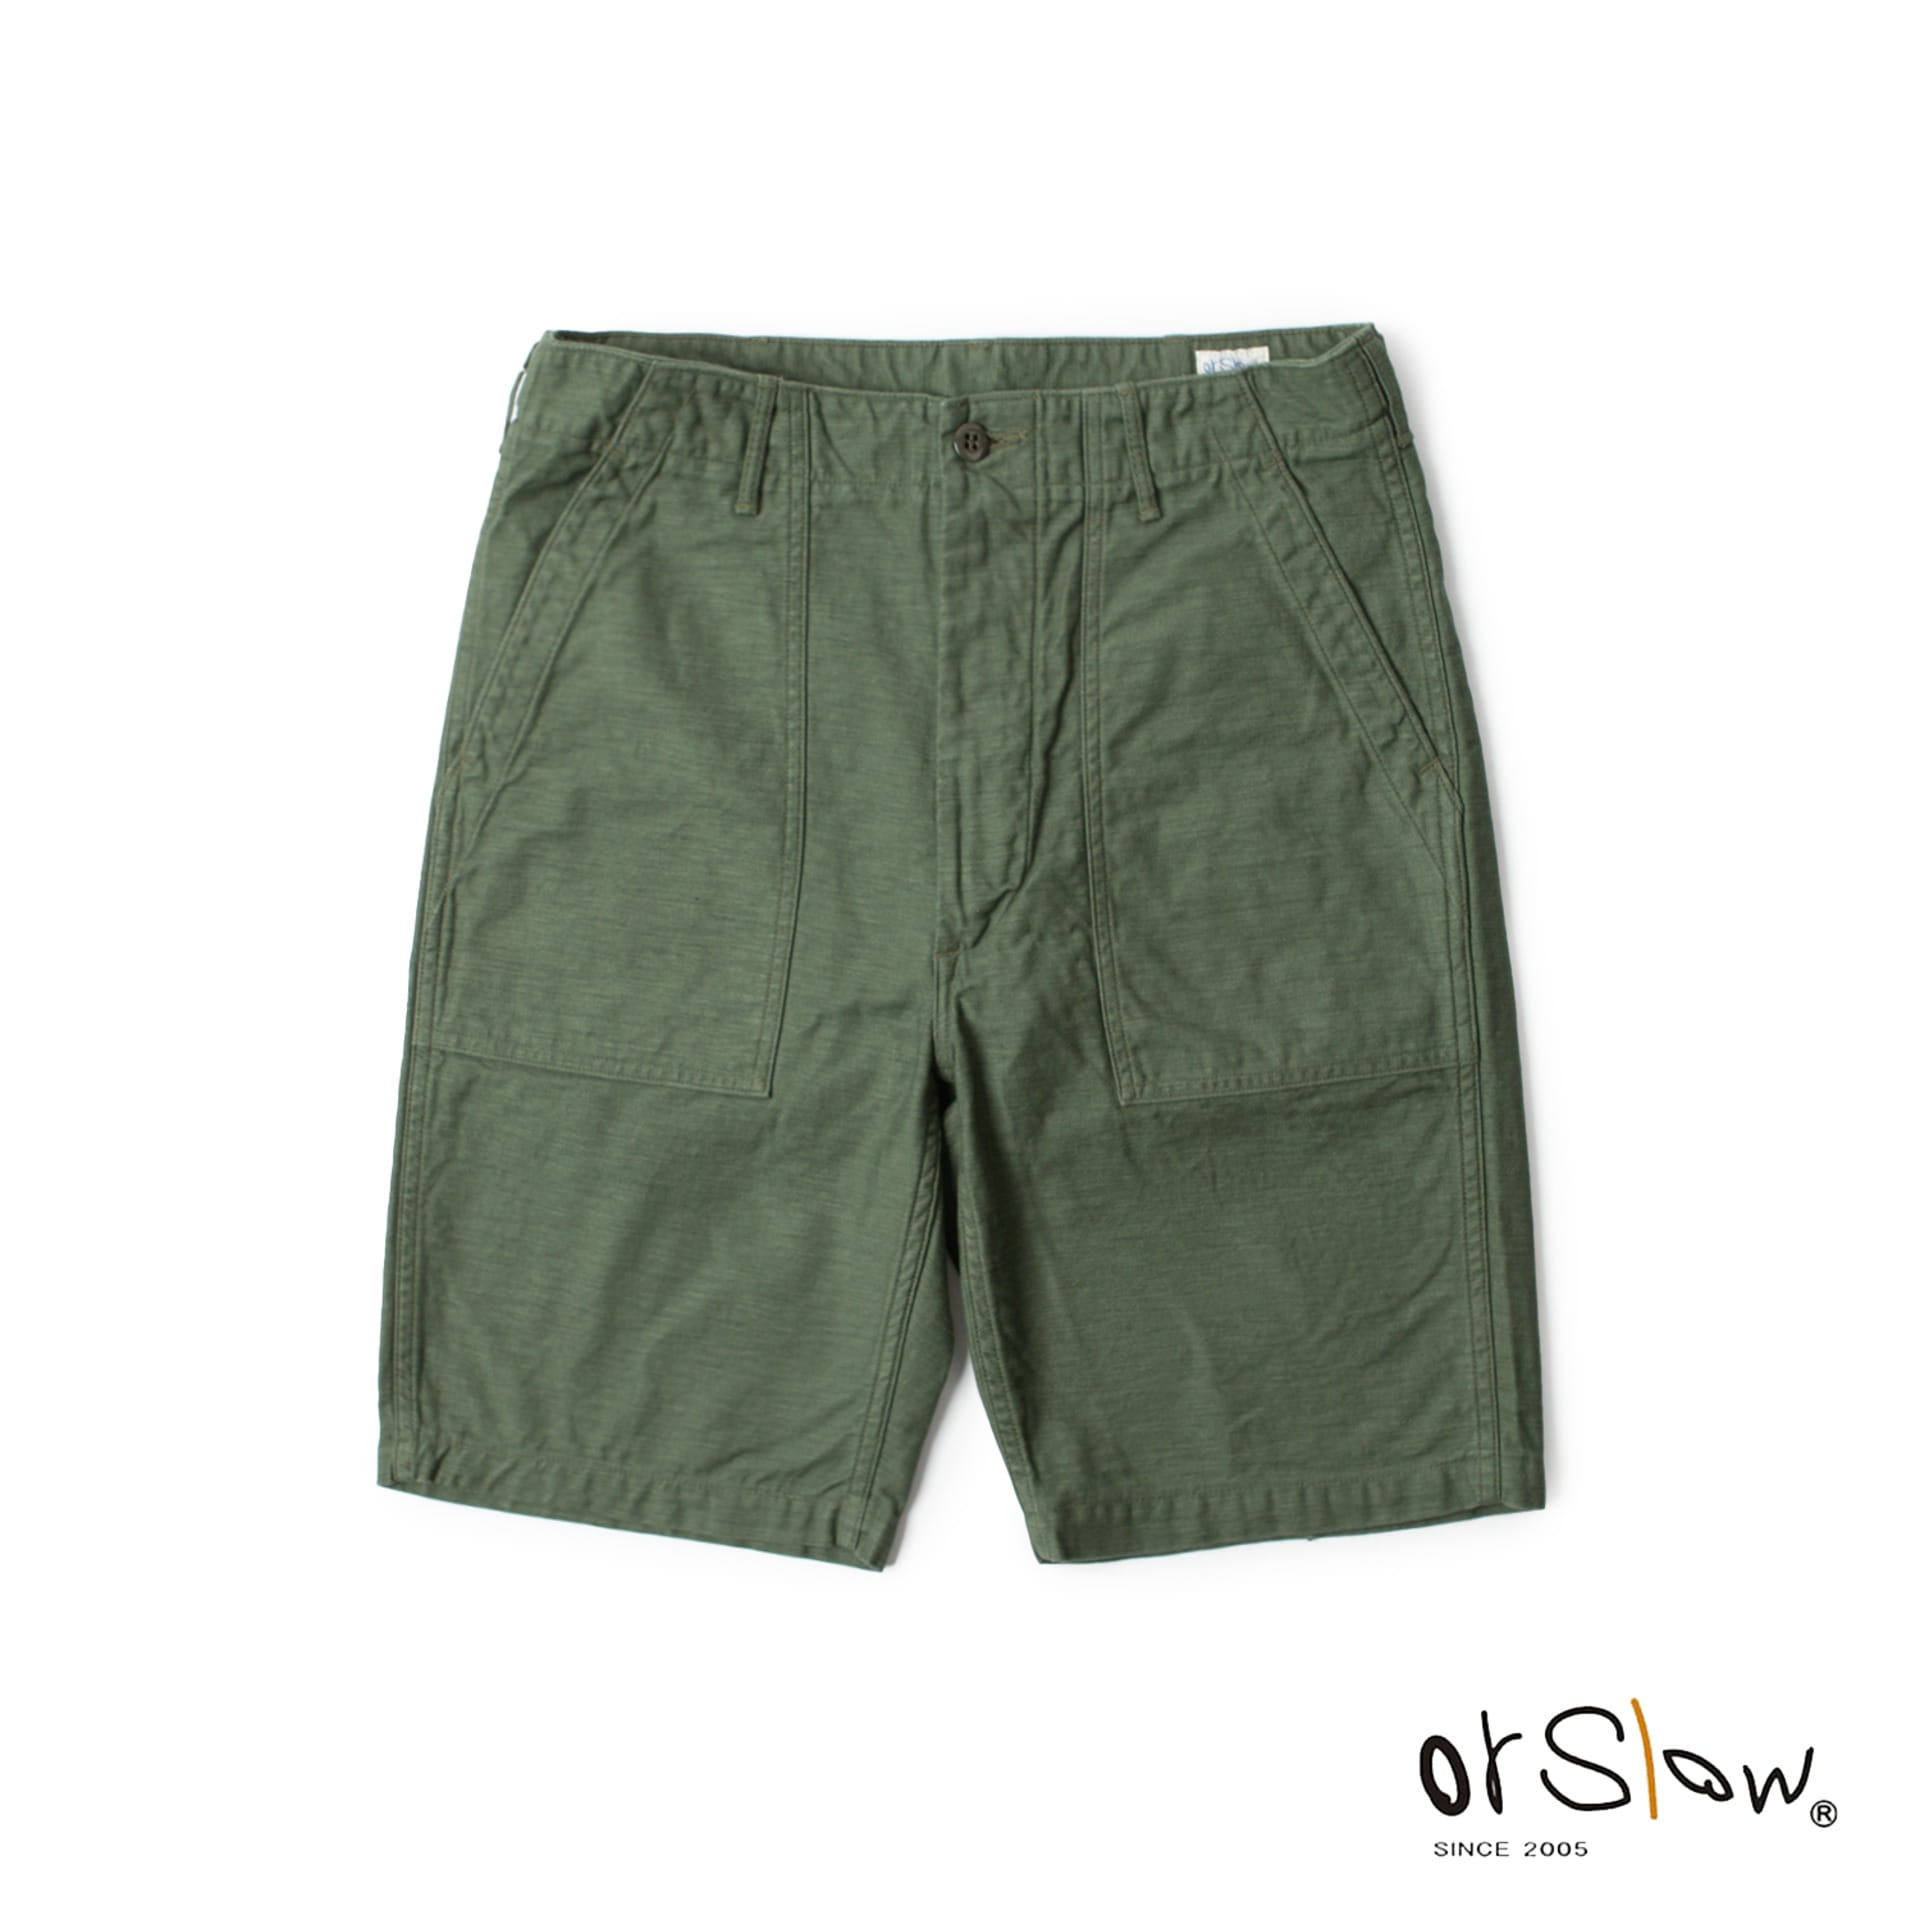 US ARMY FATIGUE SHORTS (Olive Green)